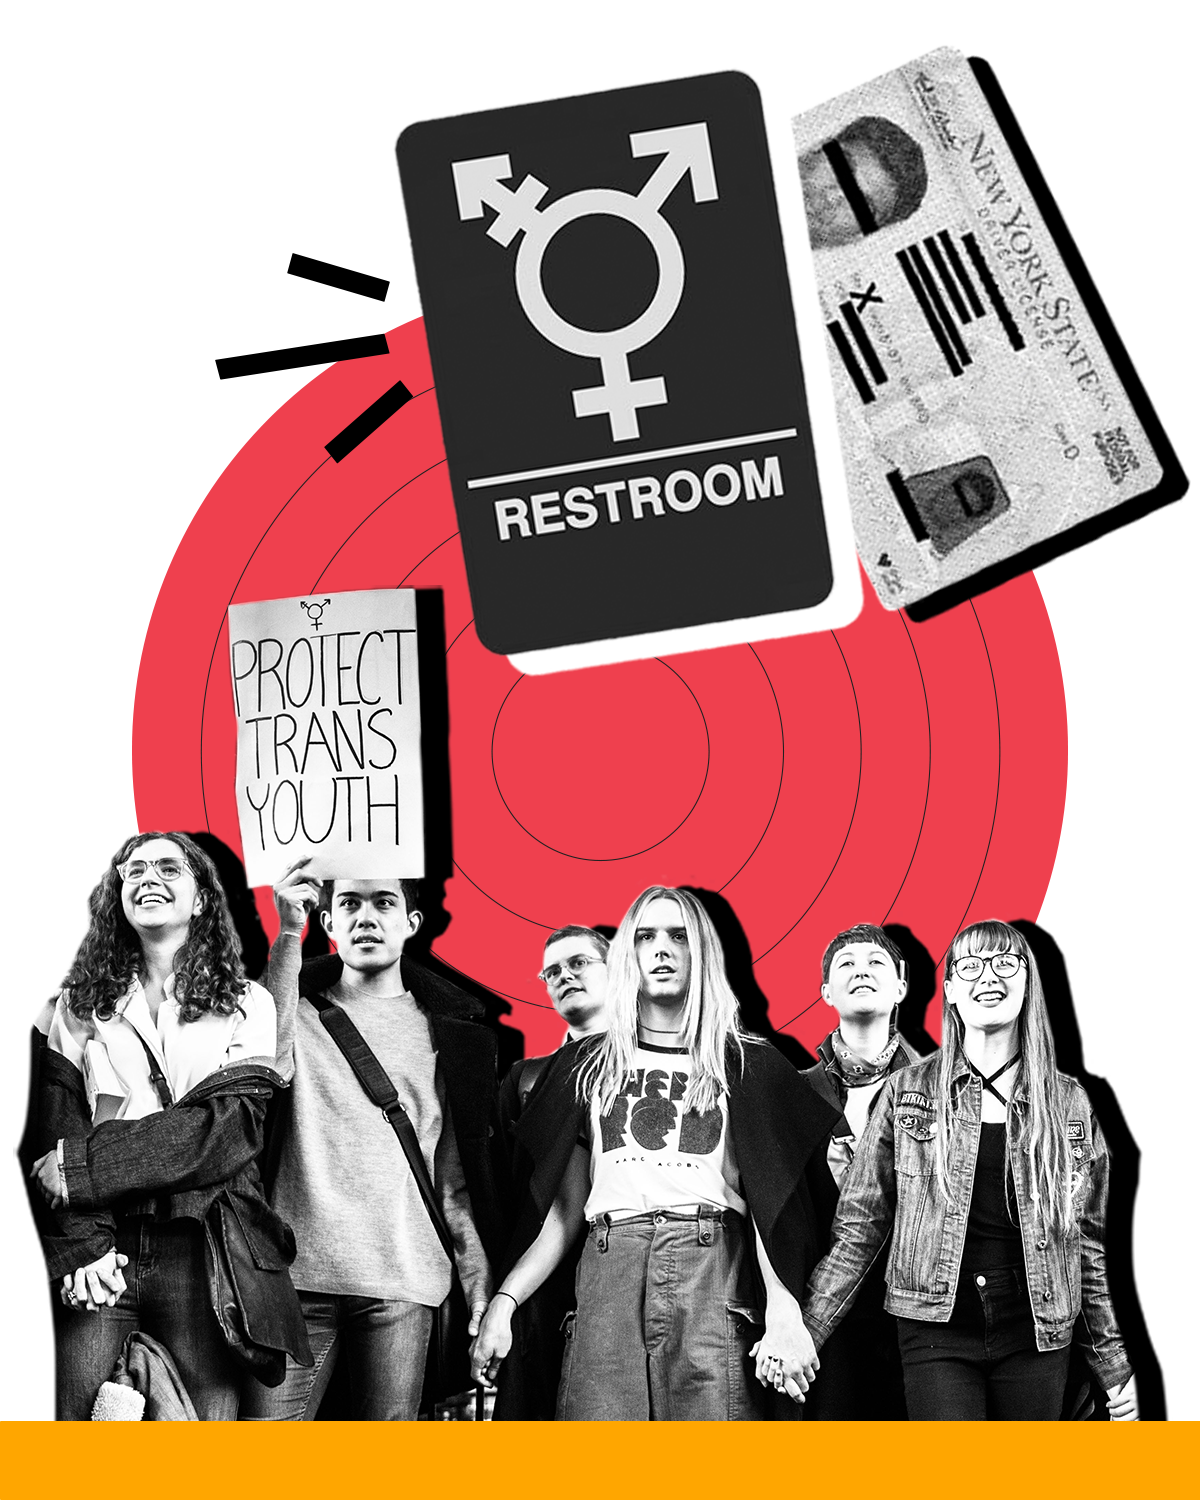 LGBTQ+ Rights Collage. Elements include: Sign for gender neutral bathroom, drivers license with Gender X marker, and students holding hands at a protest.